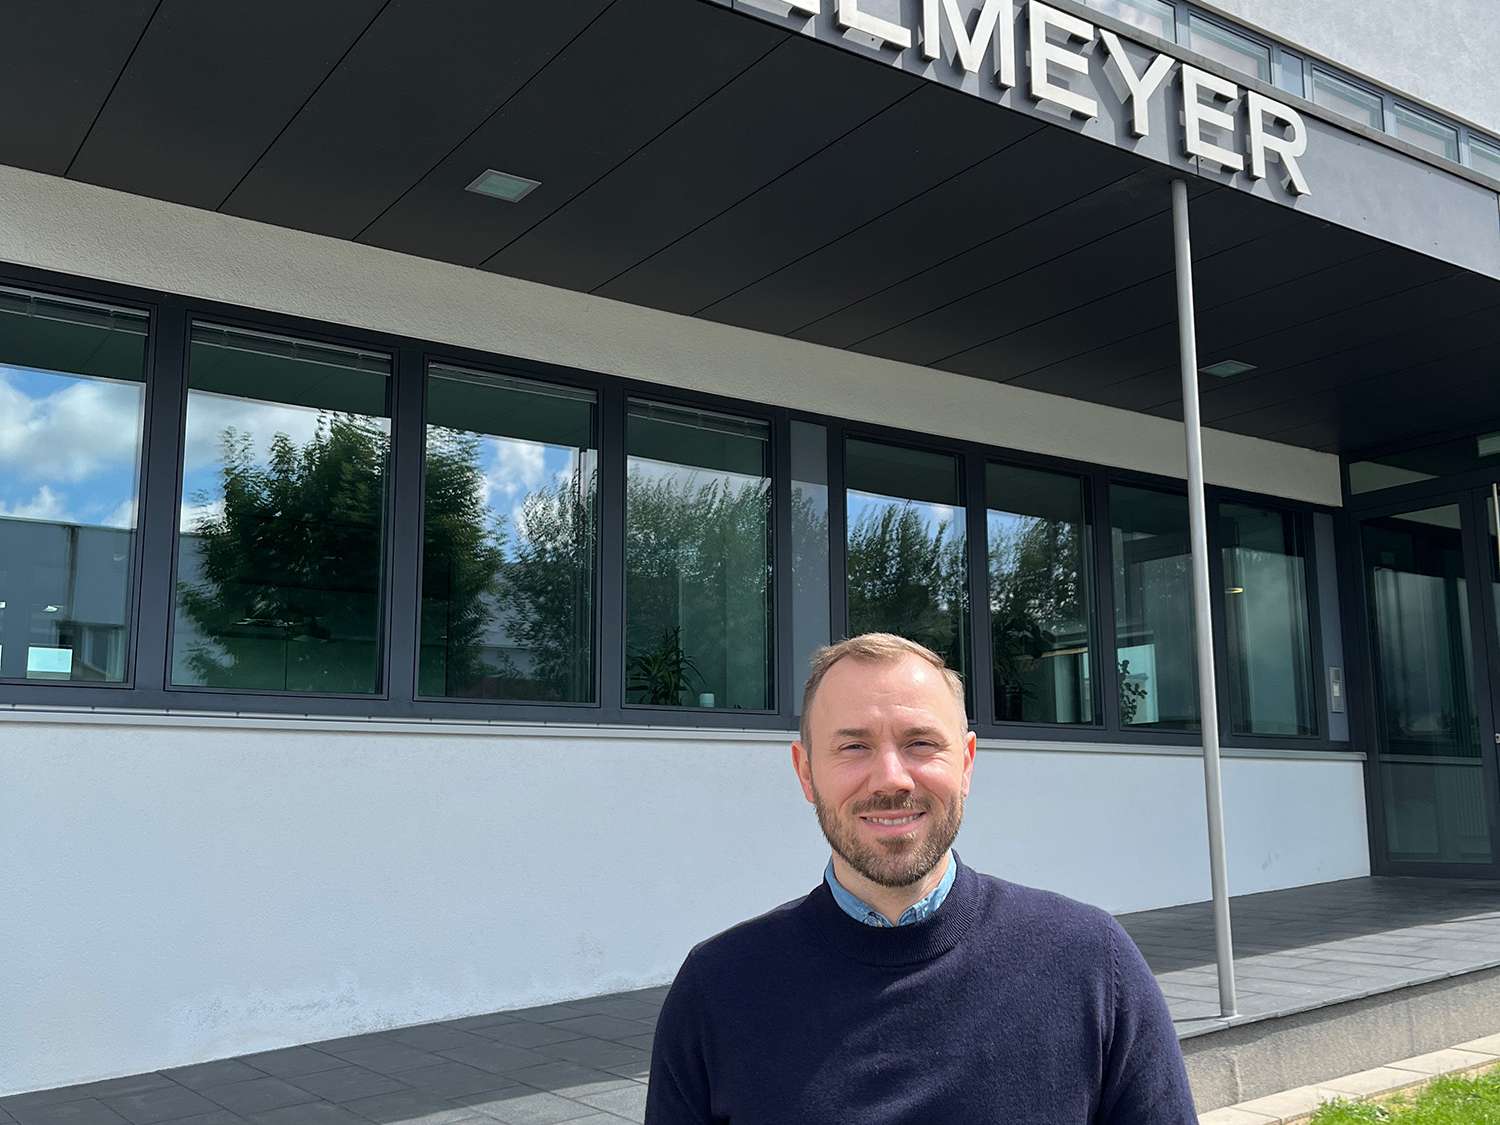 Anton Schlee stands on the pavement in front of the entrance to the Stiegelmeyer administration building in Herford and smiles into the camera.